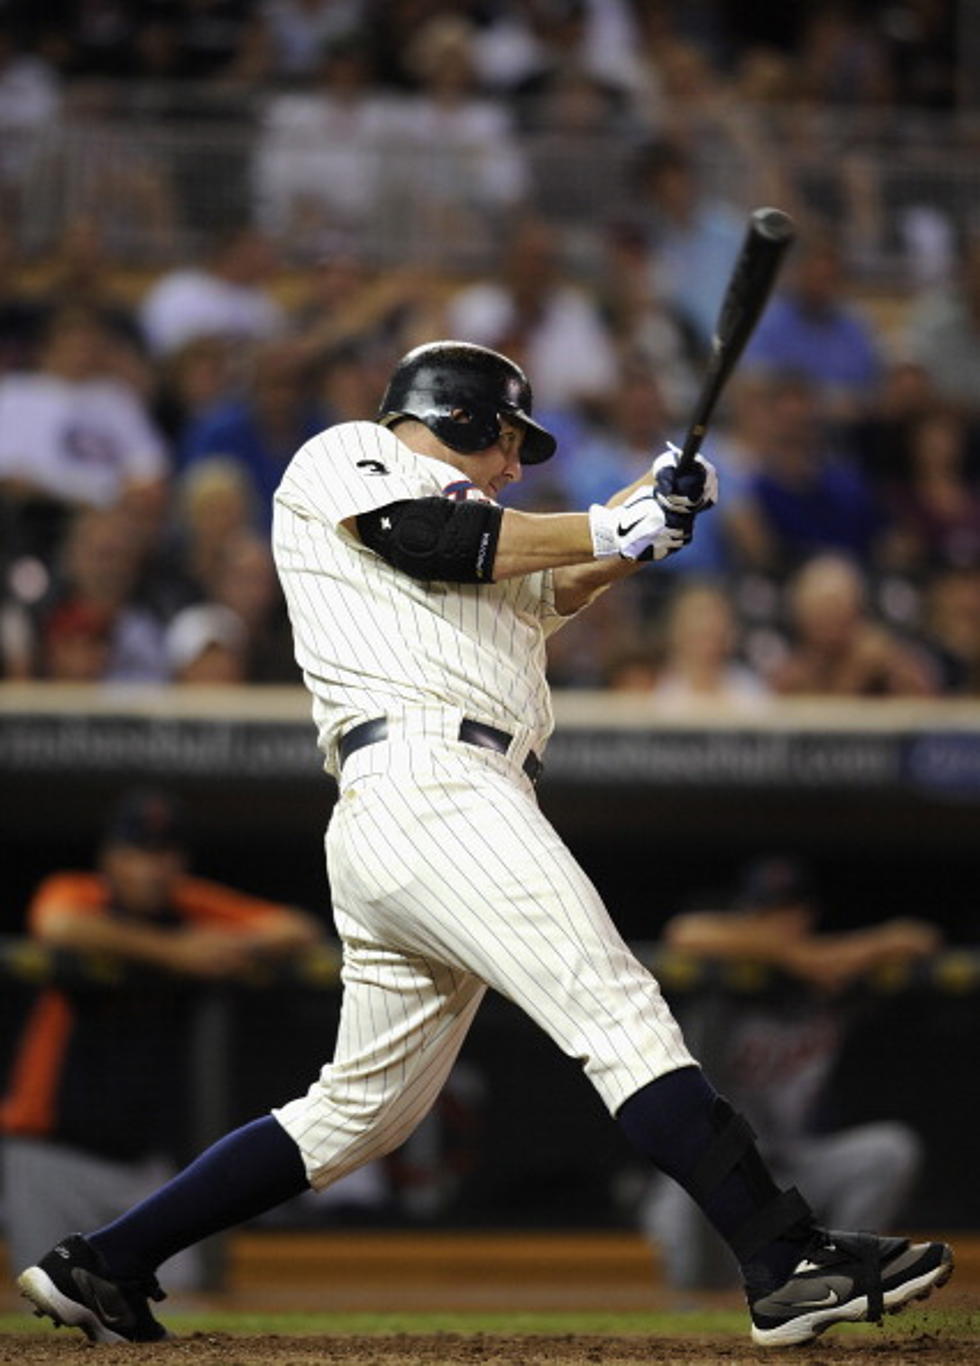 What Will Happen When Jim Thome Hits Number 600?